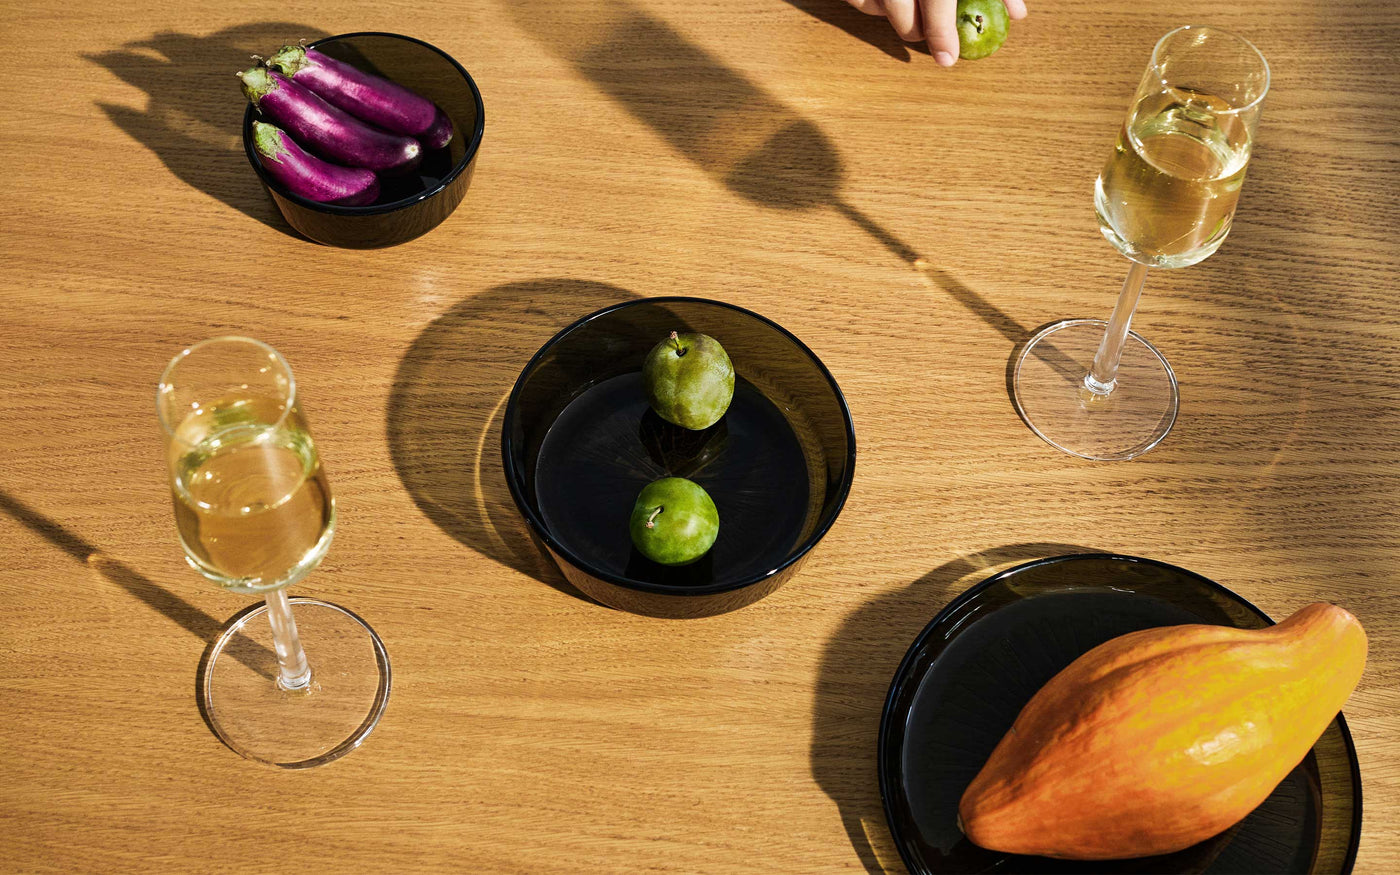 Collection of iittala Essence glass and dinnerware